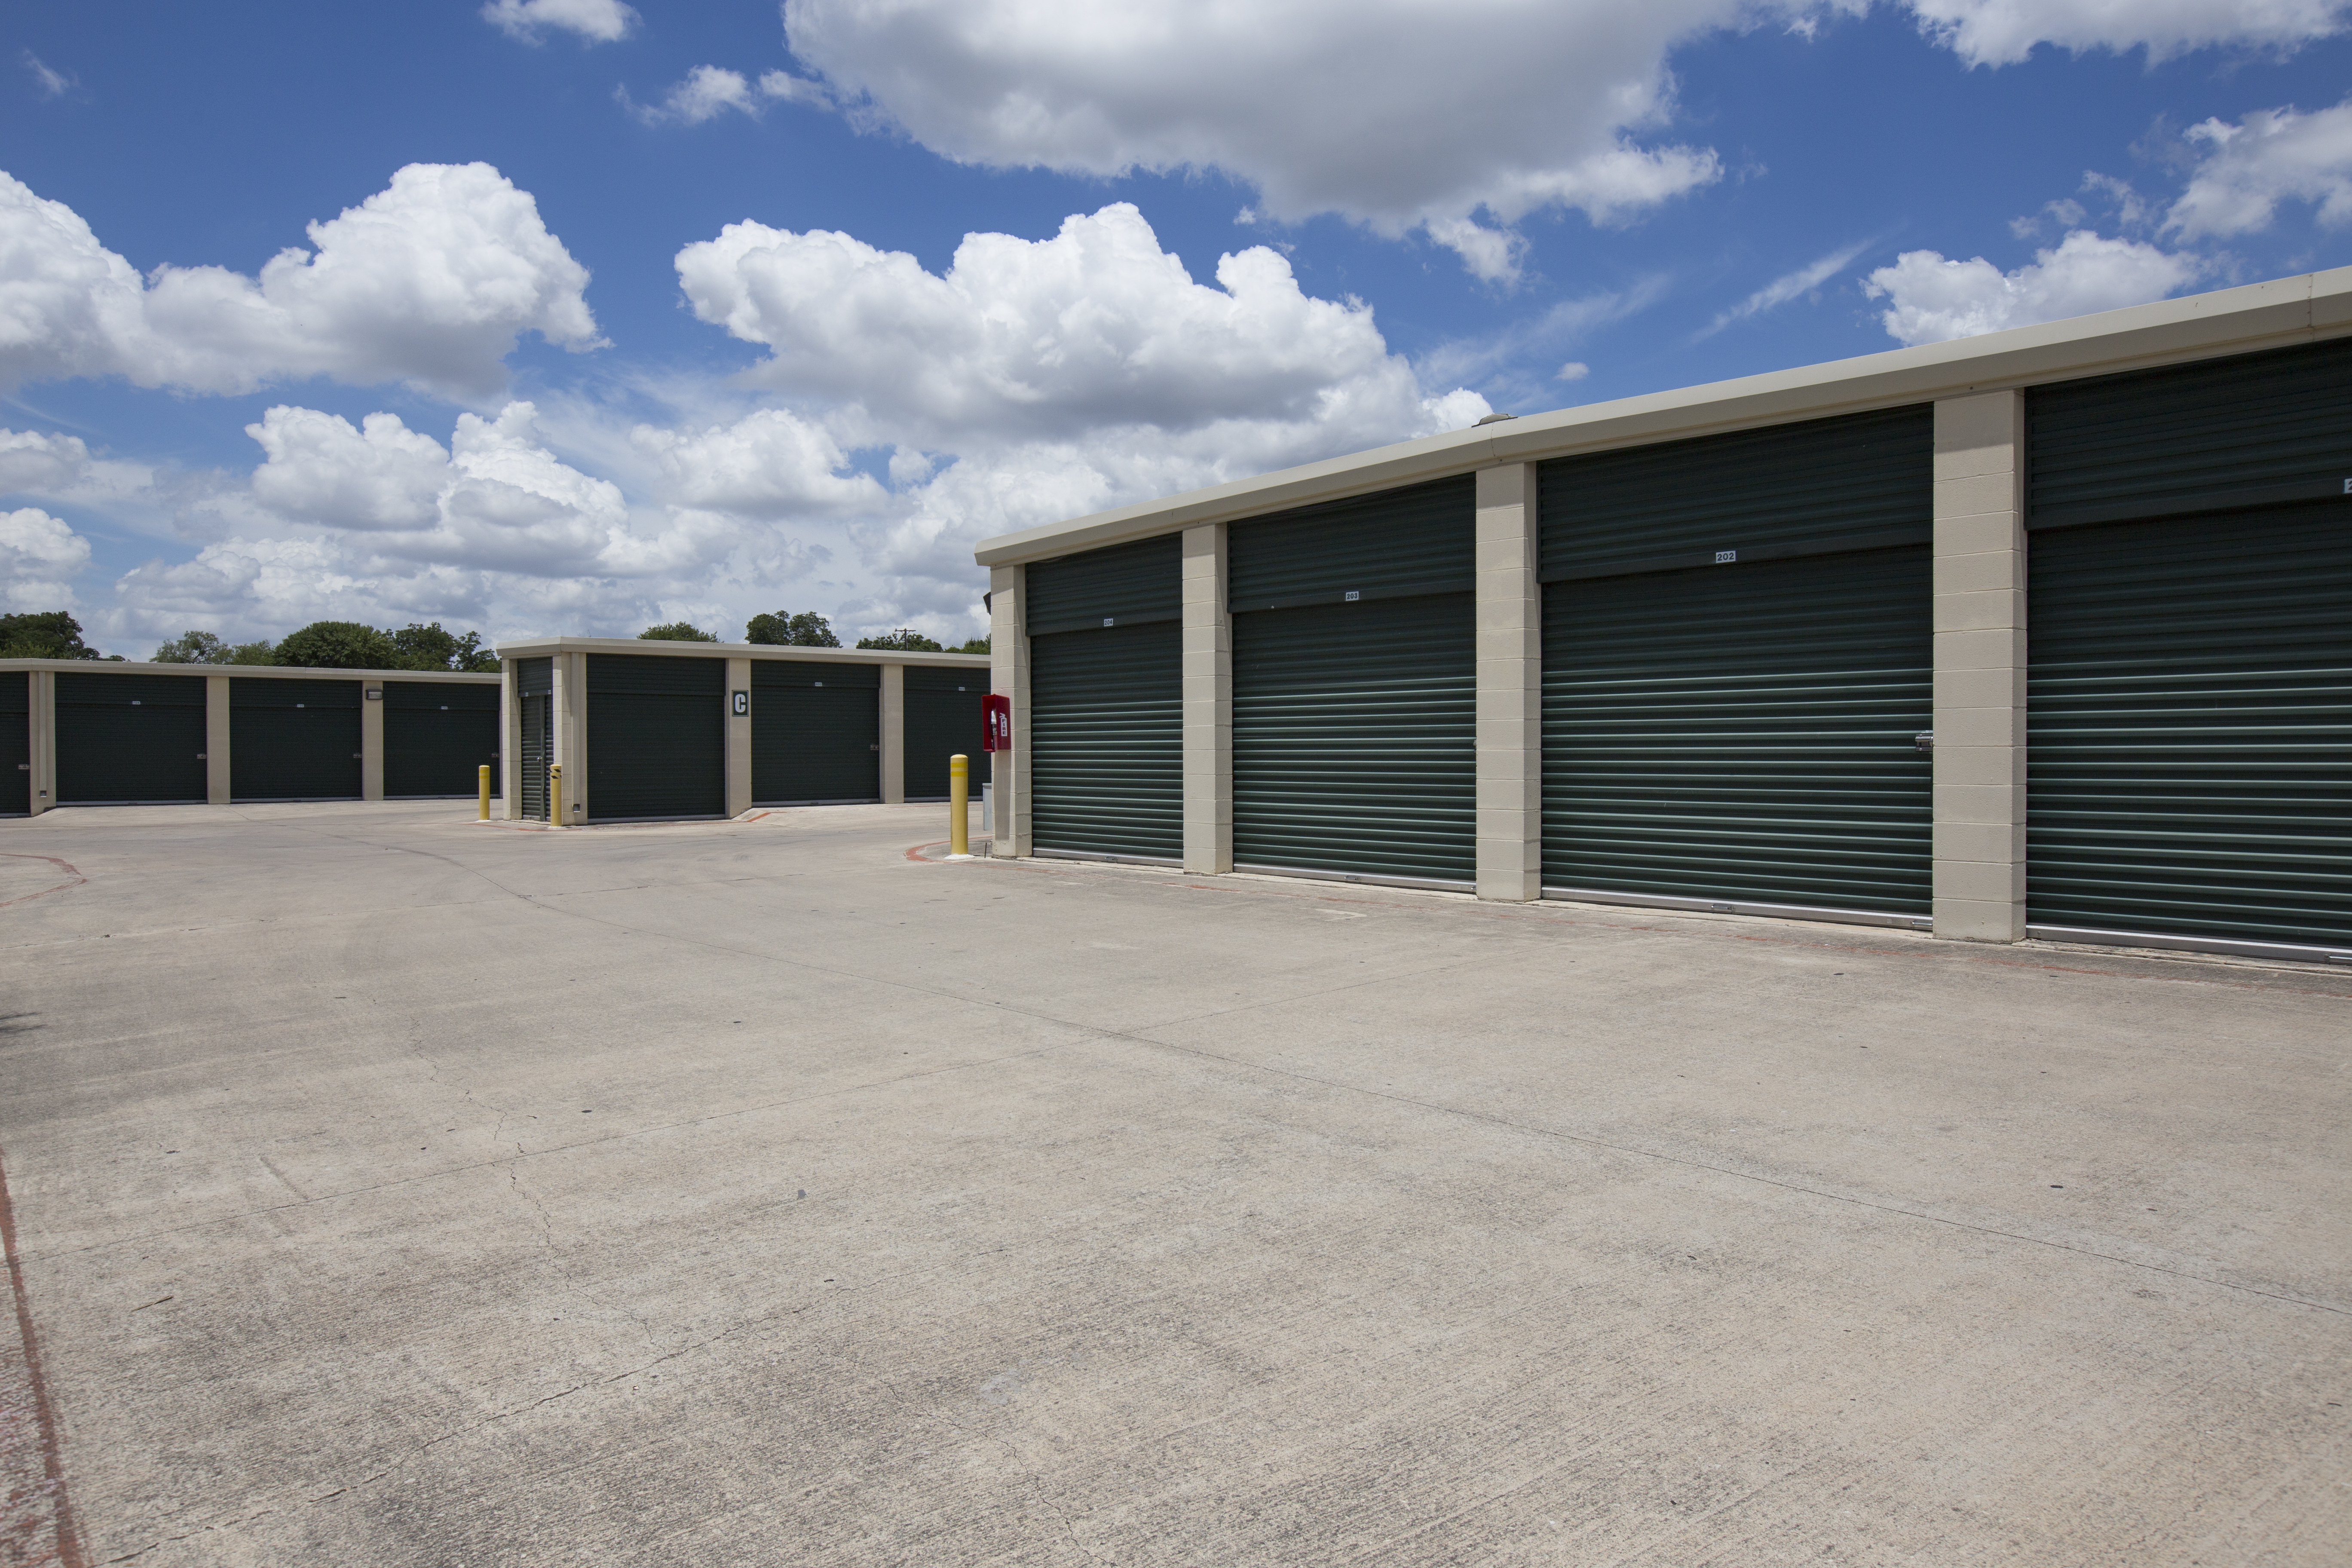 Large drive-up storage units will easy access.